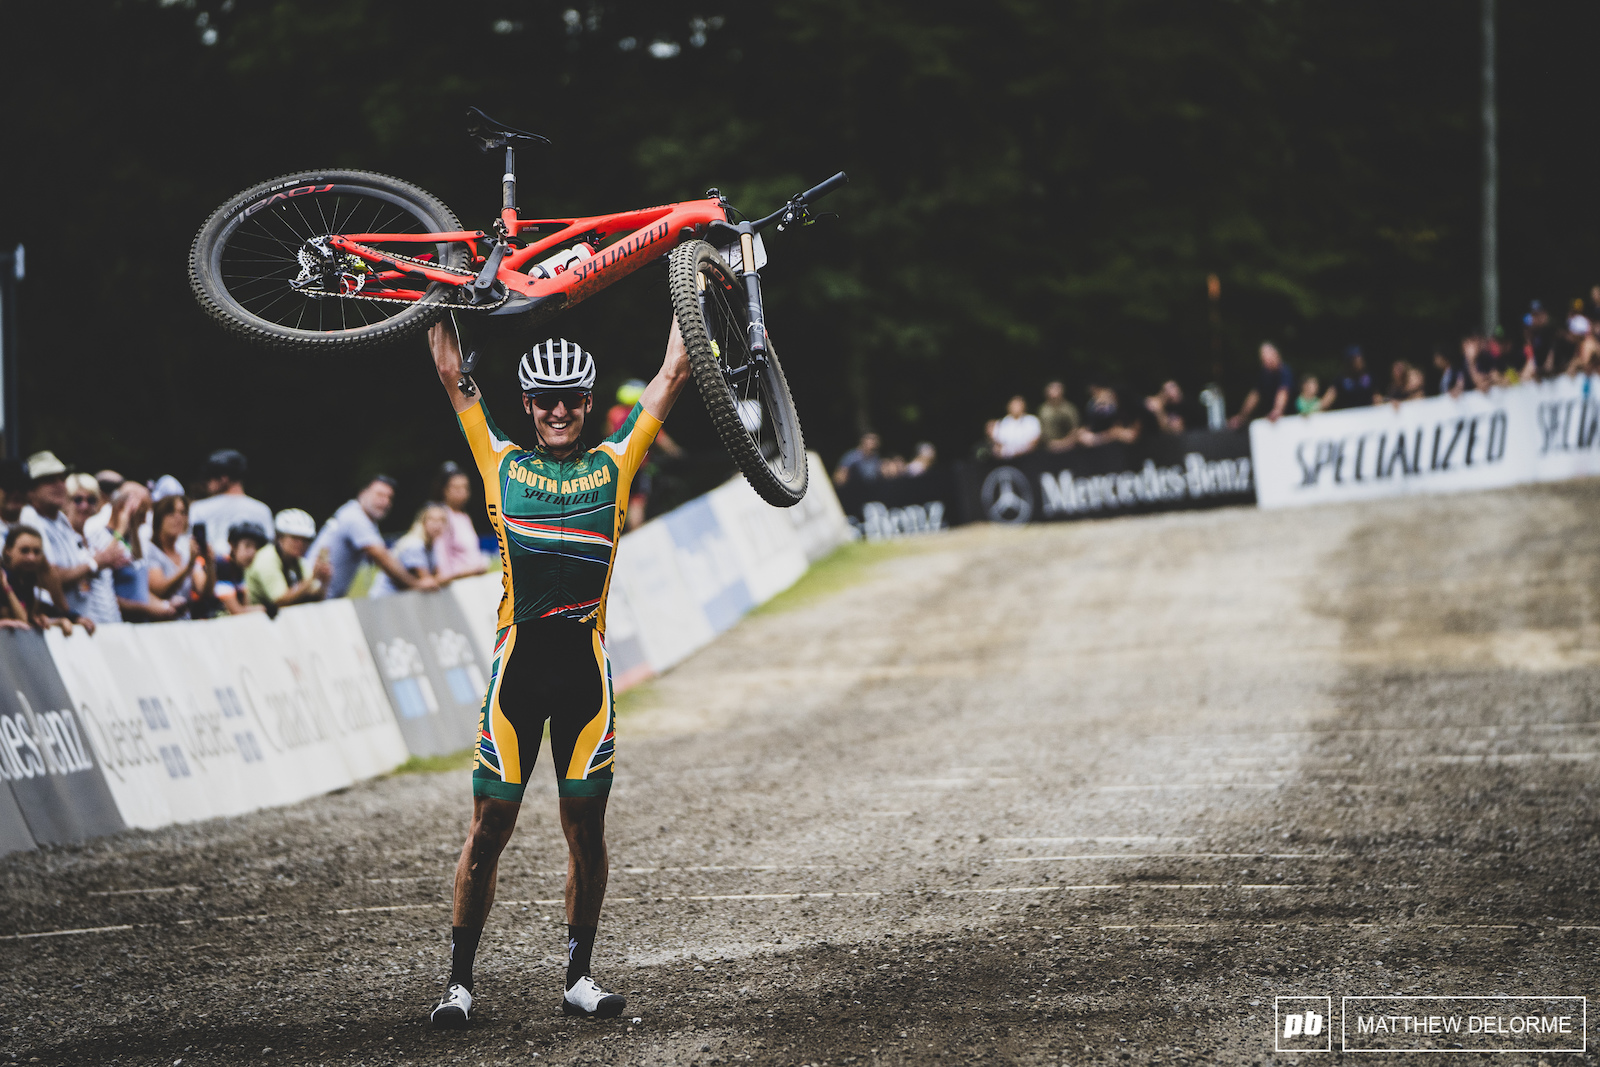 Alan Hatherly takes the win in the first ever eMTB World Championships.